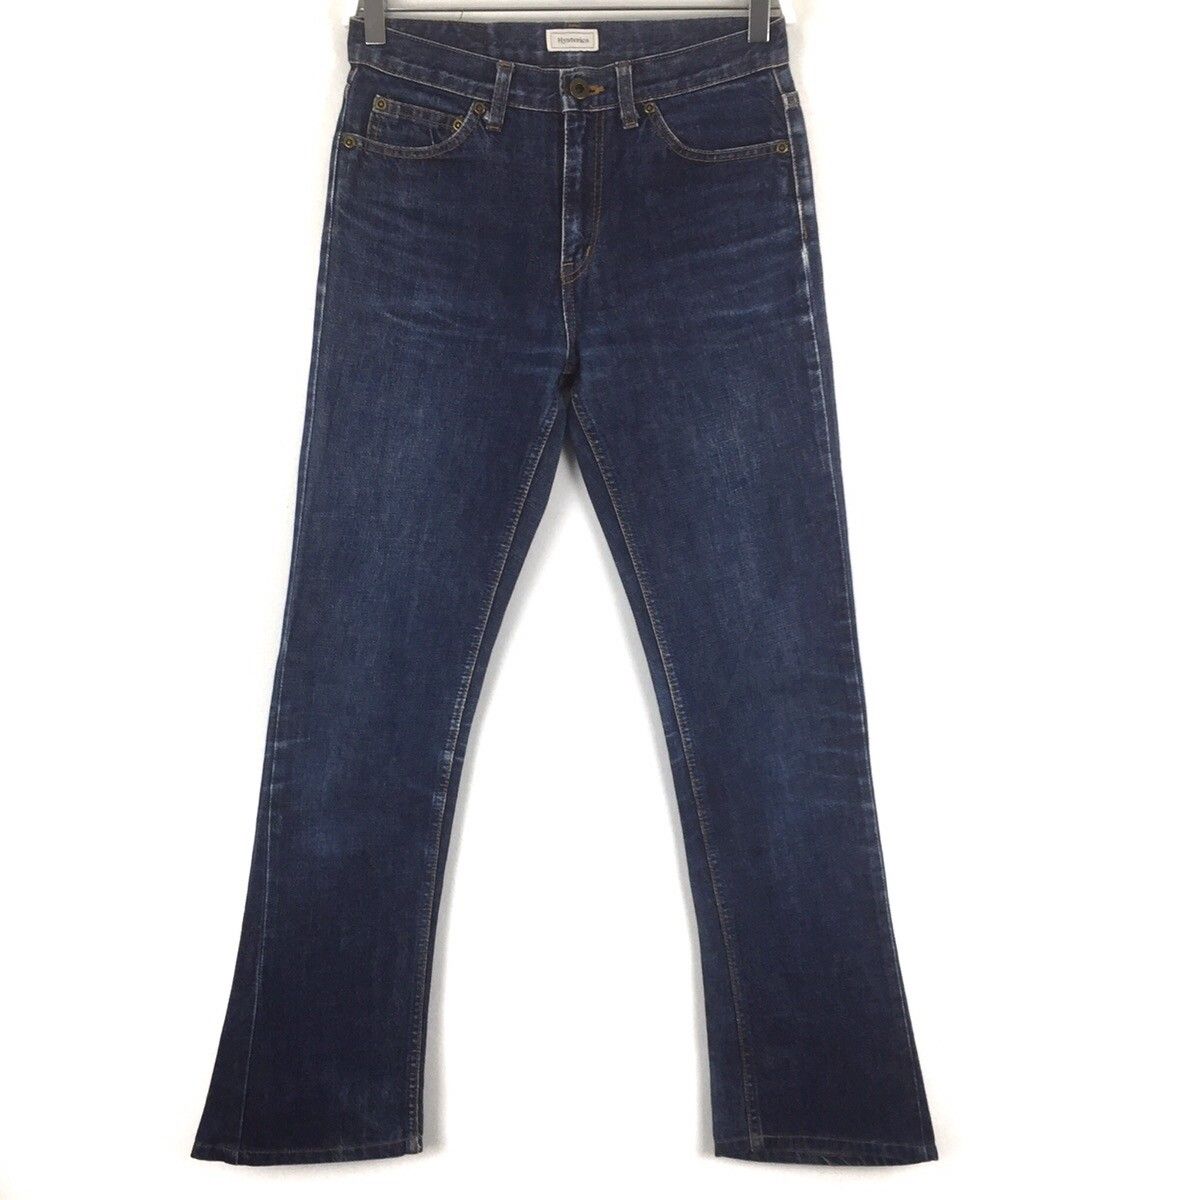 Hysteric Glamour Hysteric glamour Flared jeans bootcut nice design ...